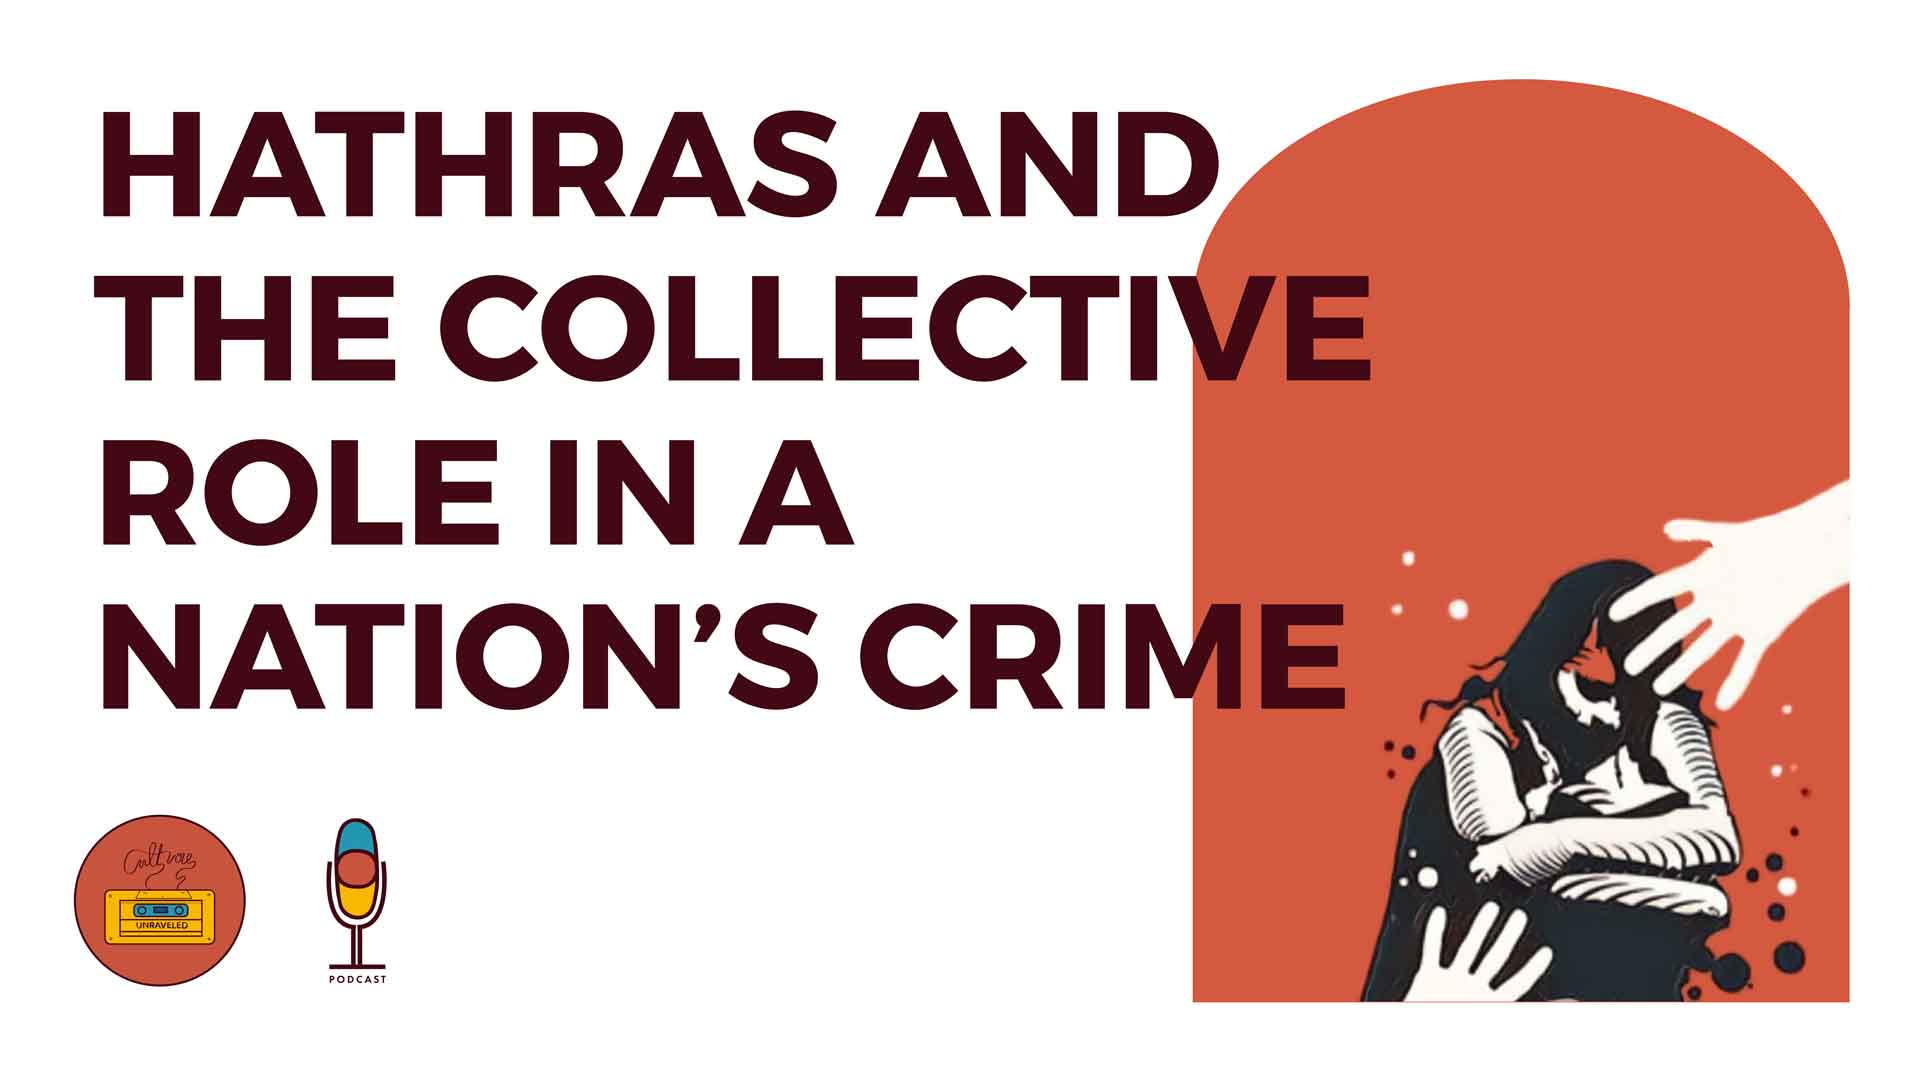 Hathras and the Collective Role in a Nation’s Crime